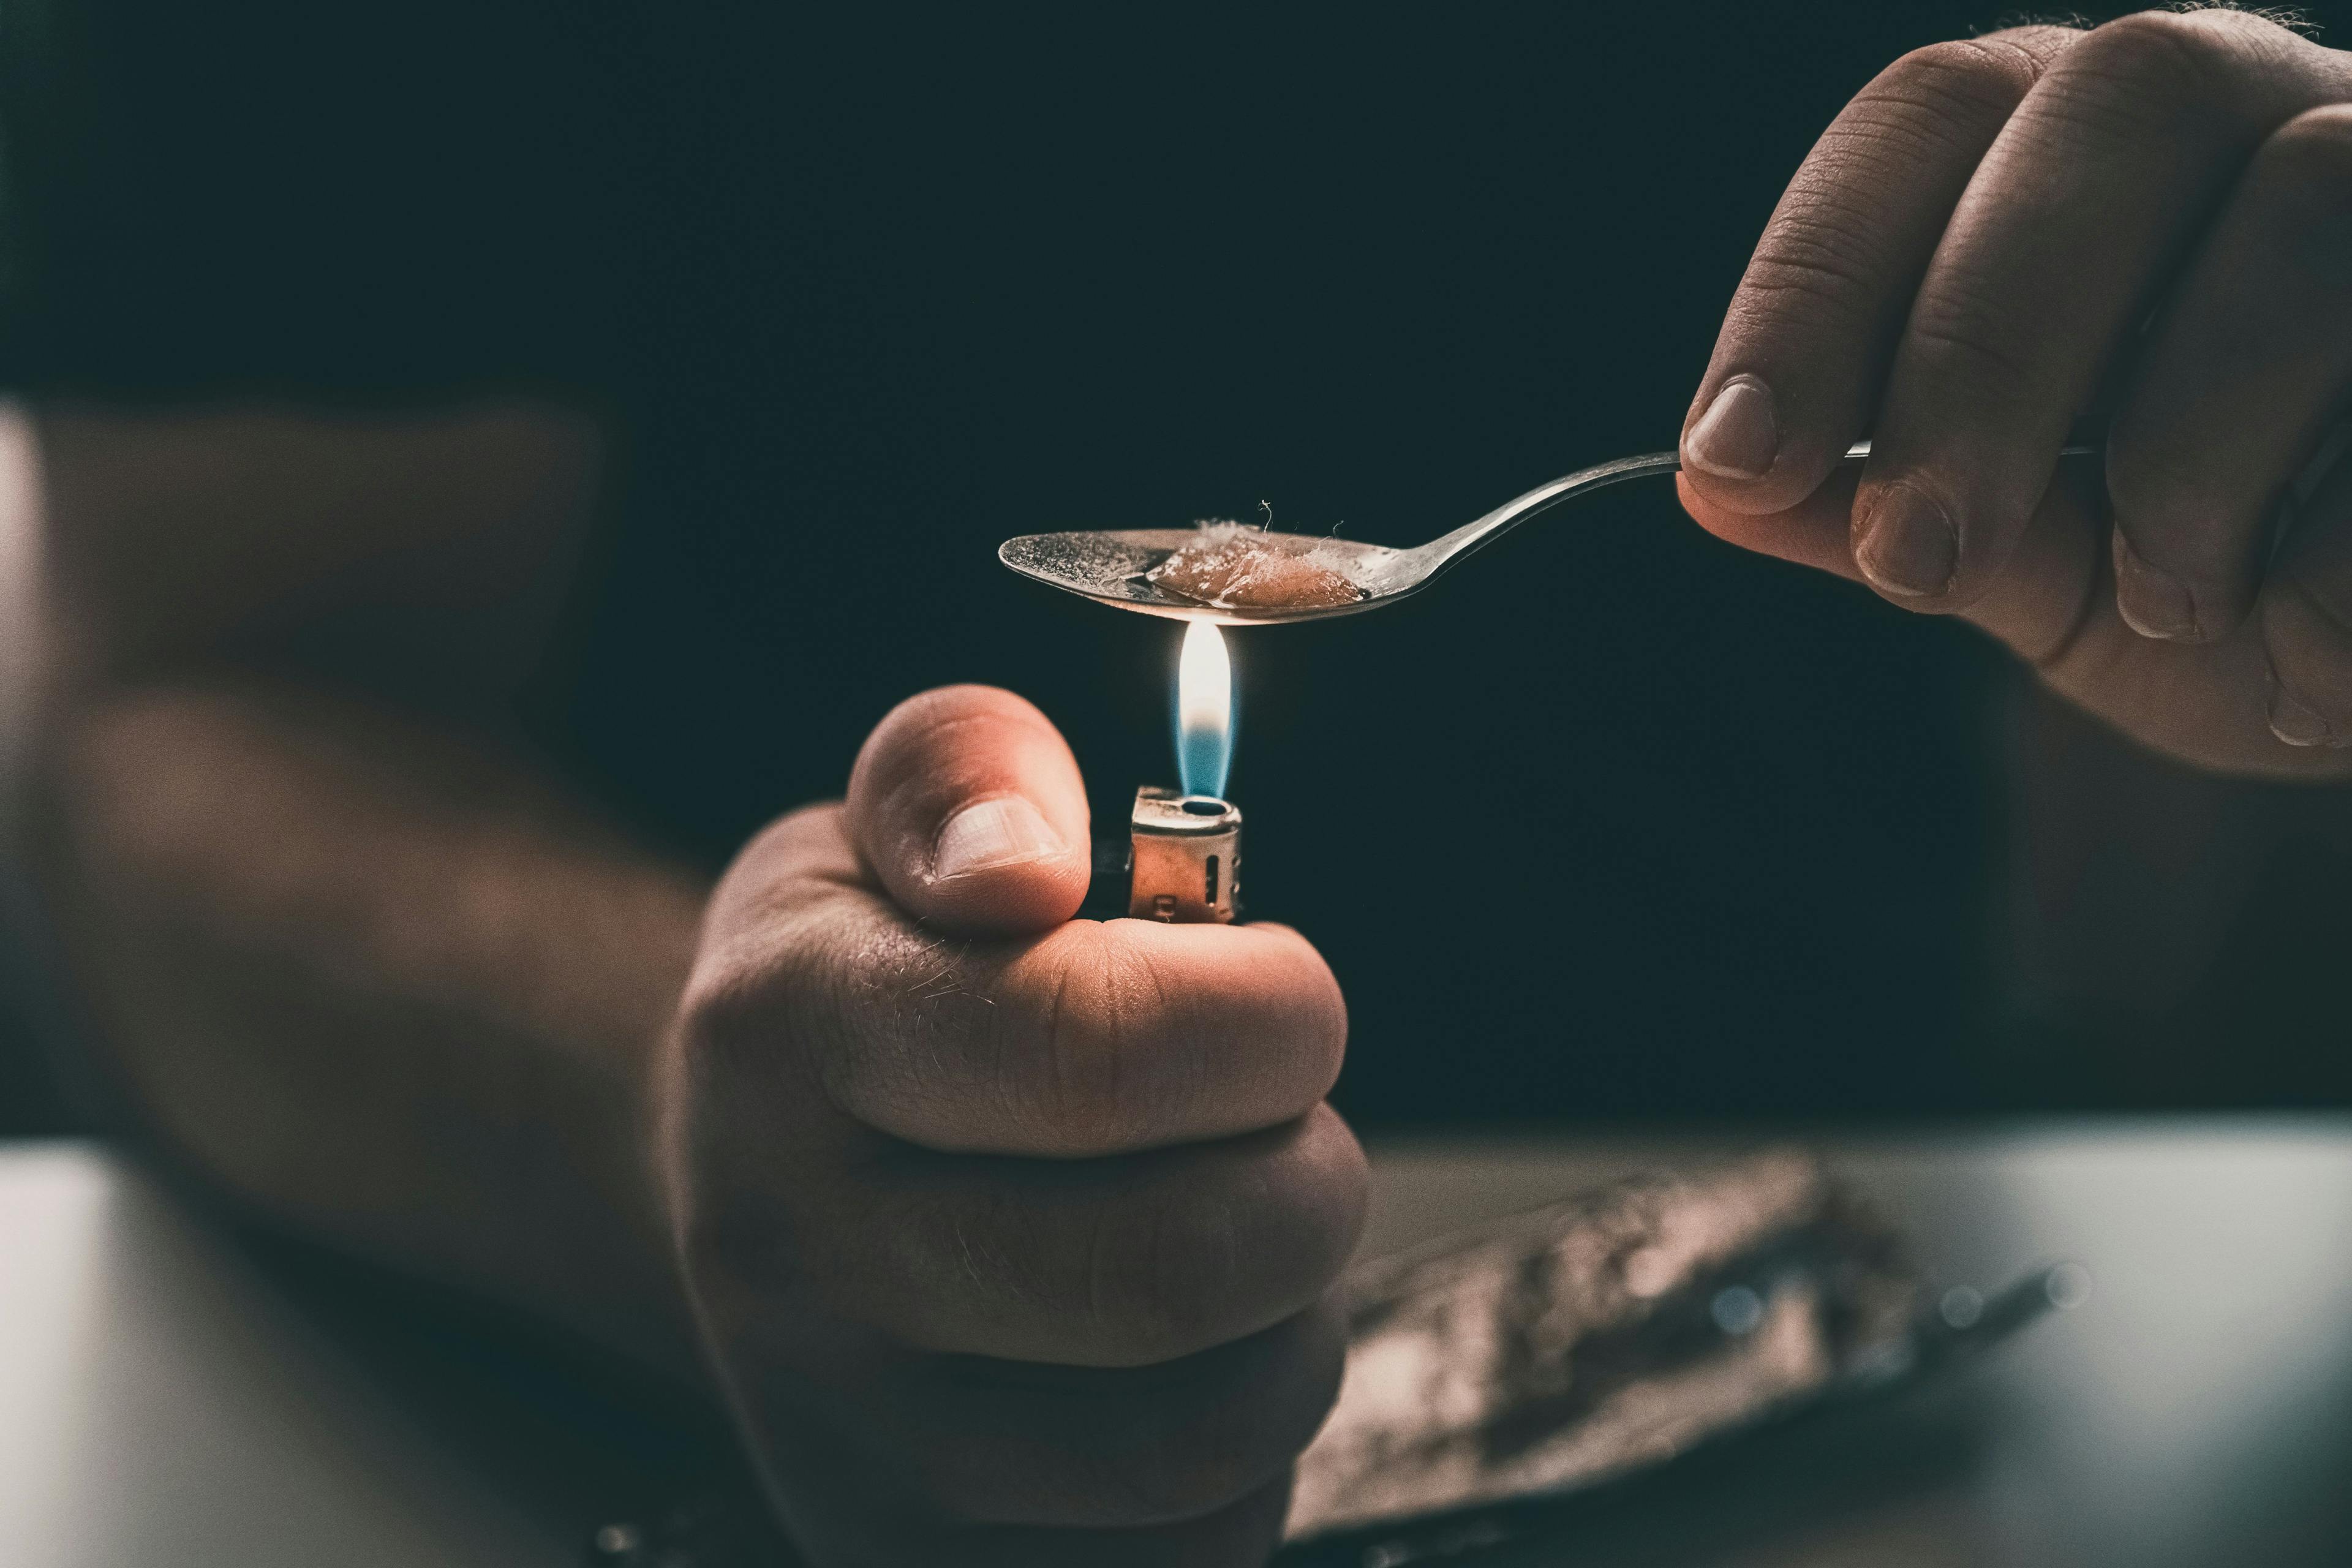 Exploring the association between methamphetamine use and the development of psychotic symptoms, such as paranoid delusions, ideas of reference, and auditory hallucinations.